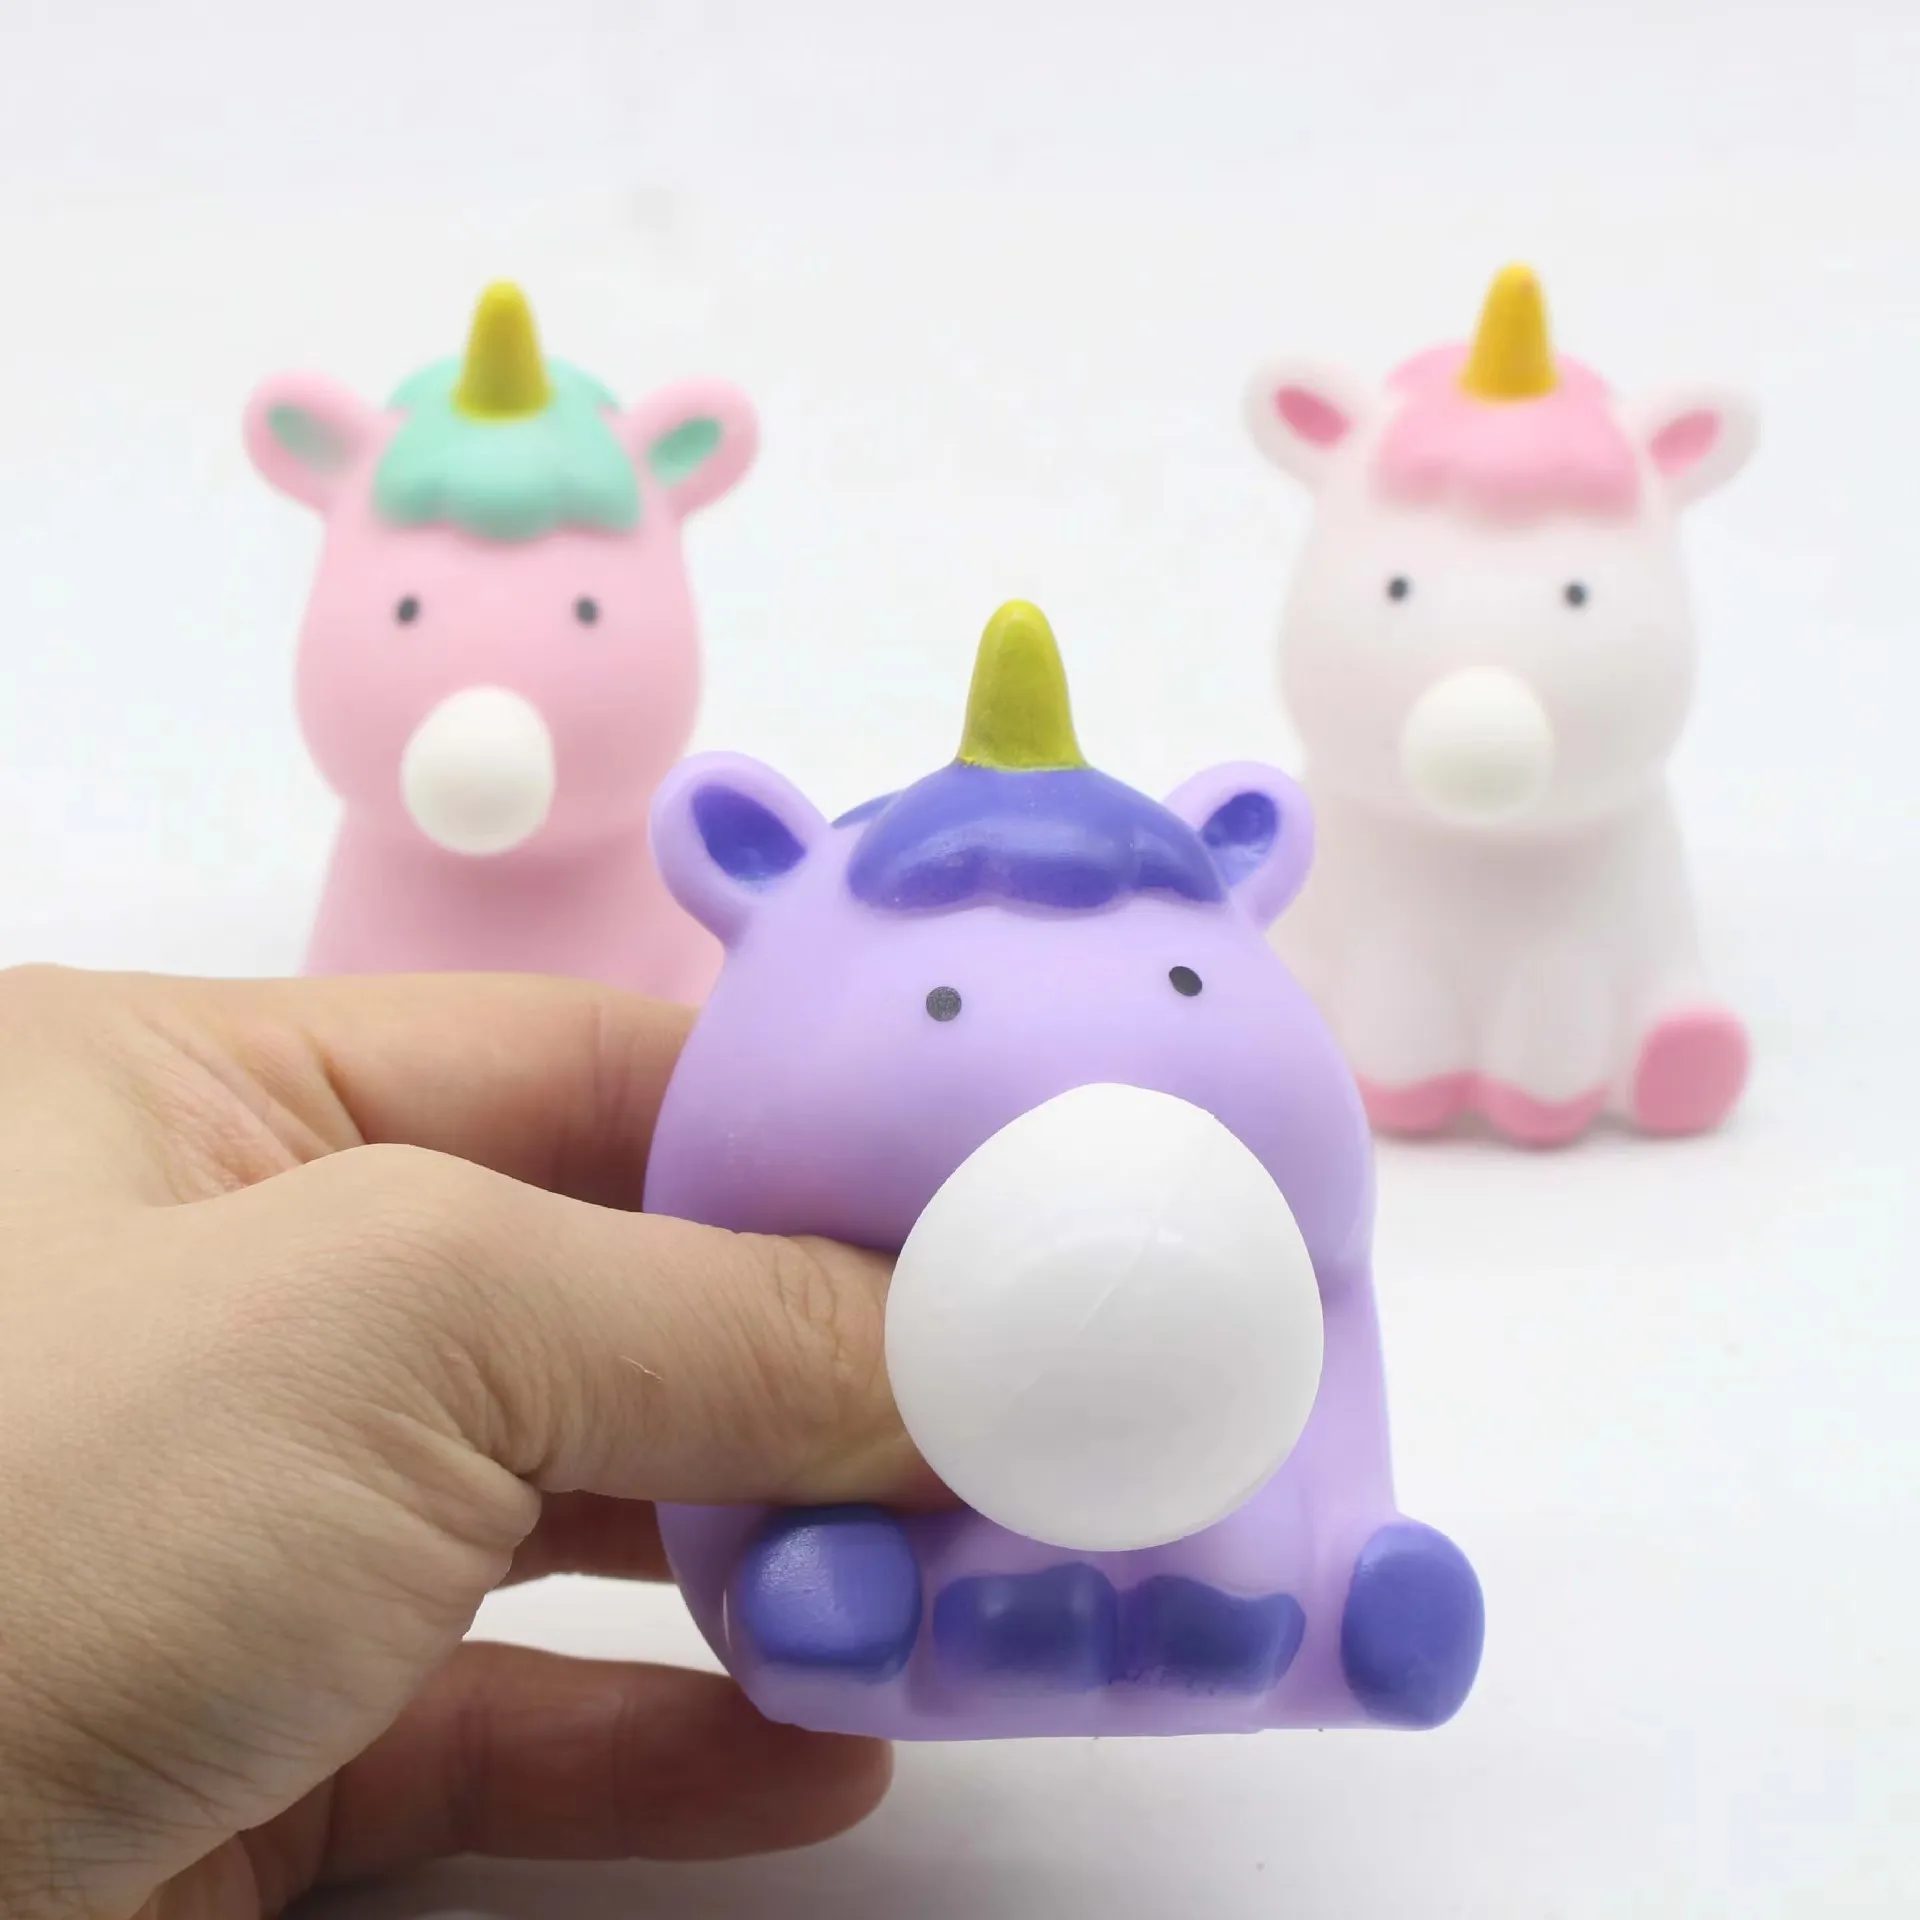 New Blow Spits Bubbles Squeeze Fidget Toys Fashion Soft Dinosaurs Ducks Squishy Anti Stress Relief Toy for Autism Kids Gift New